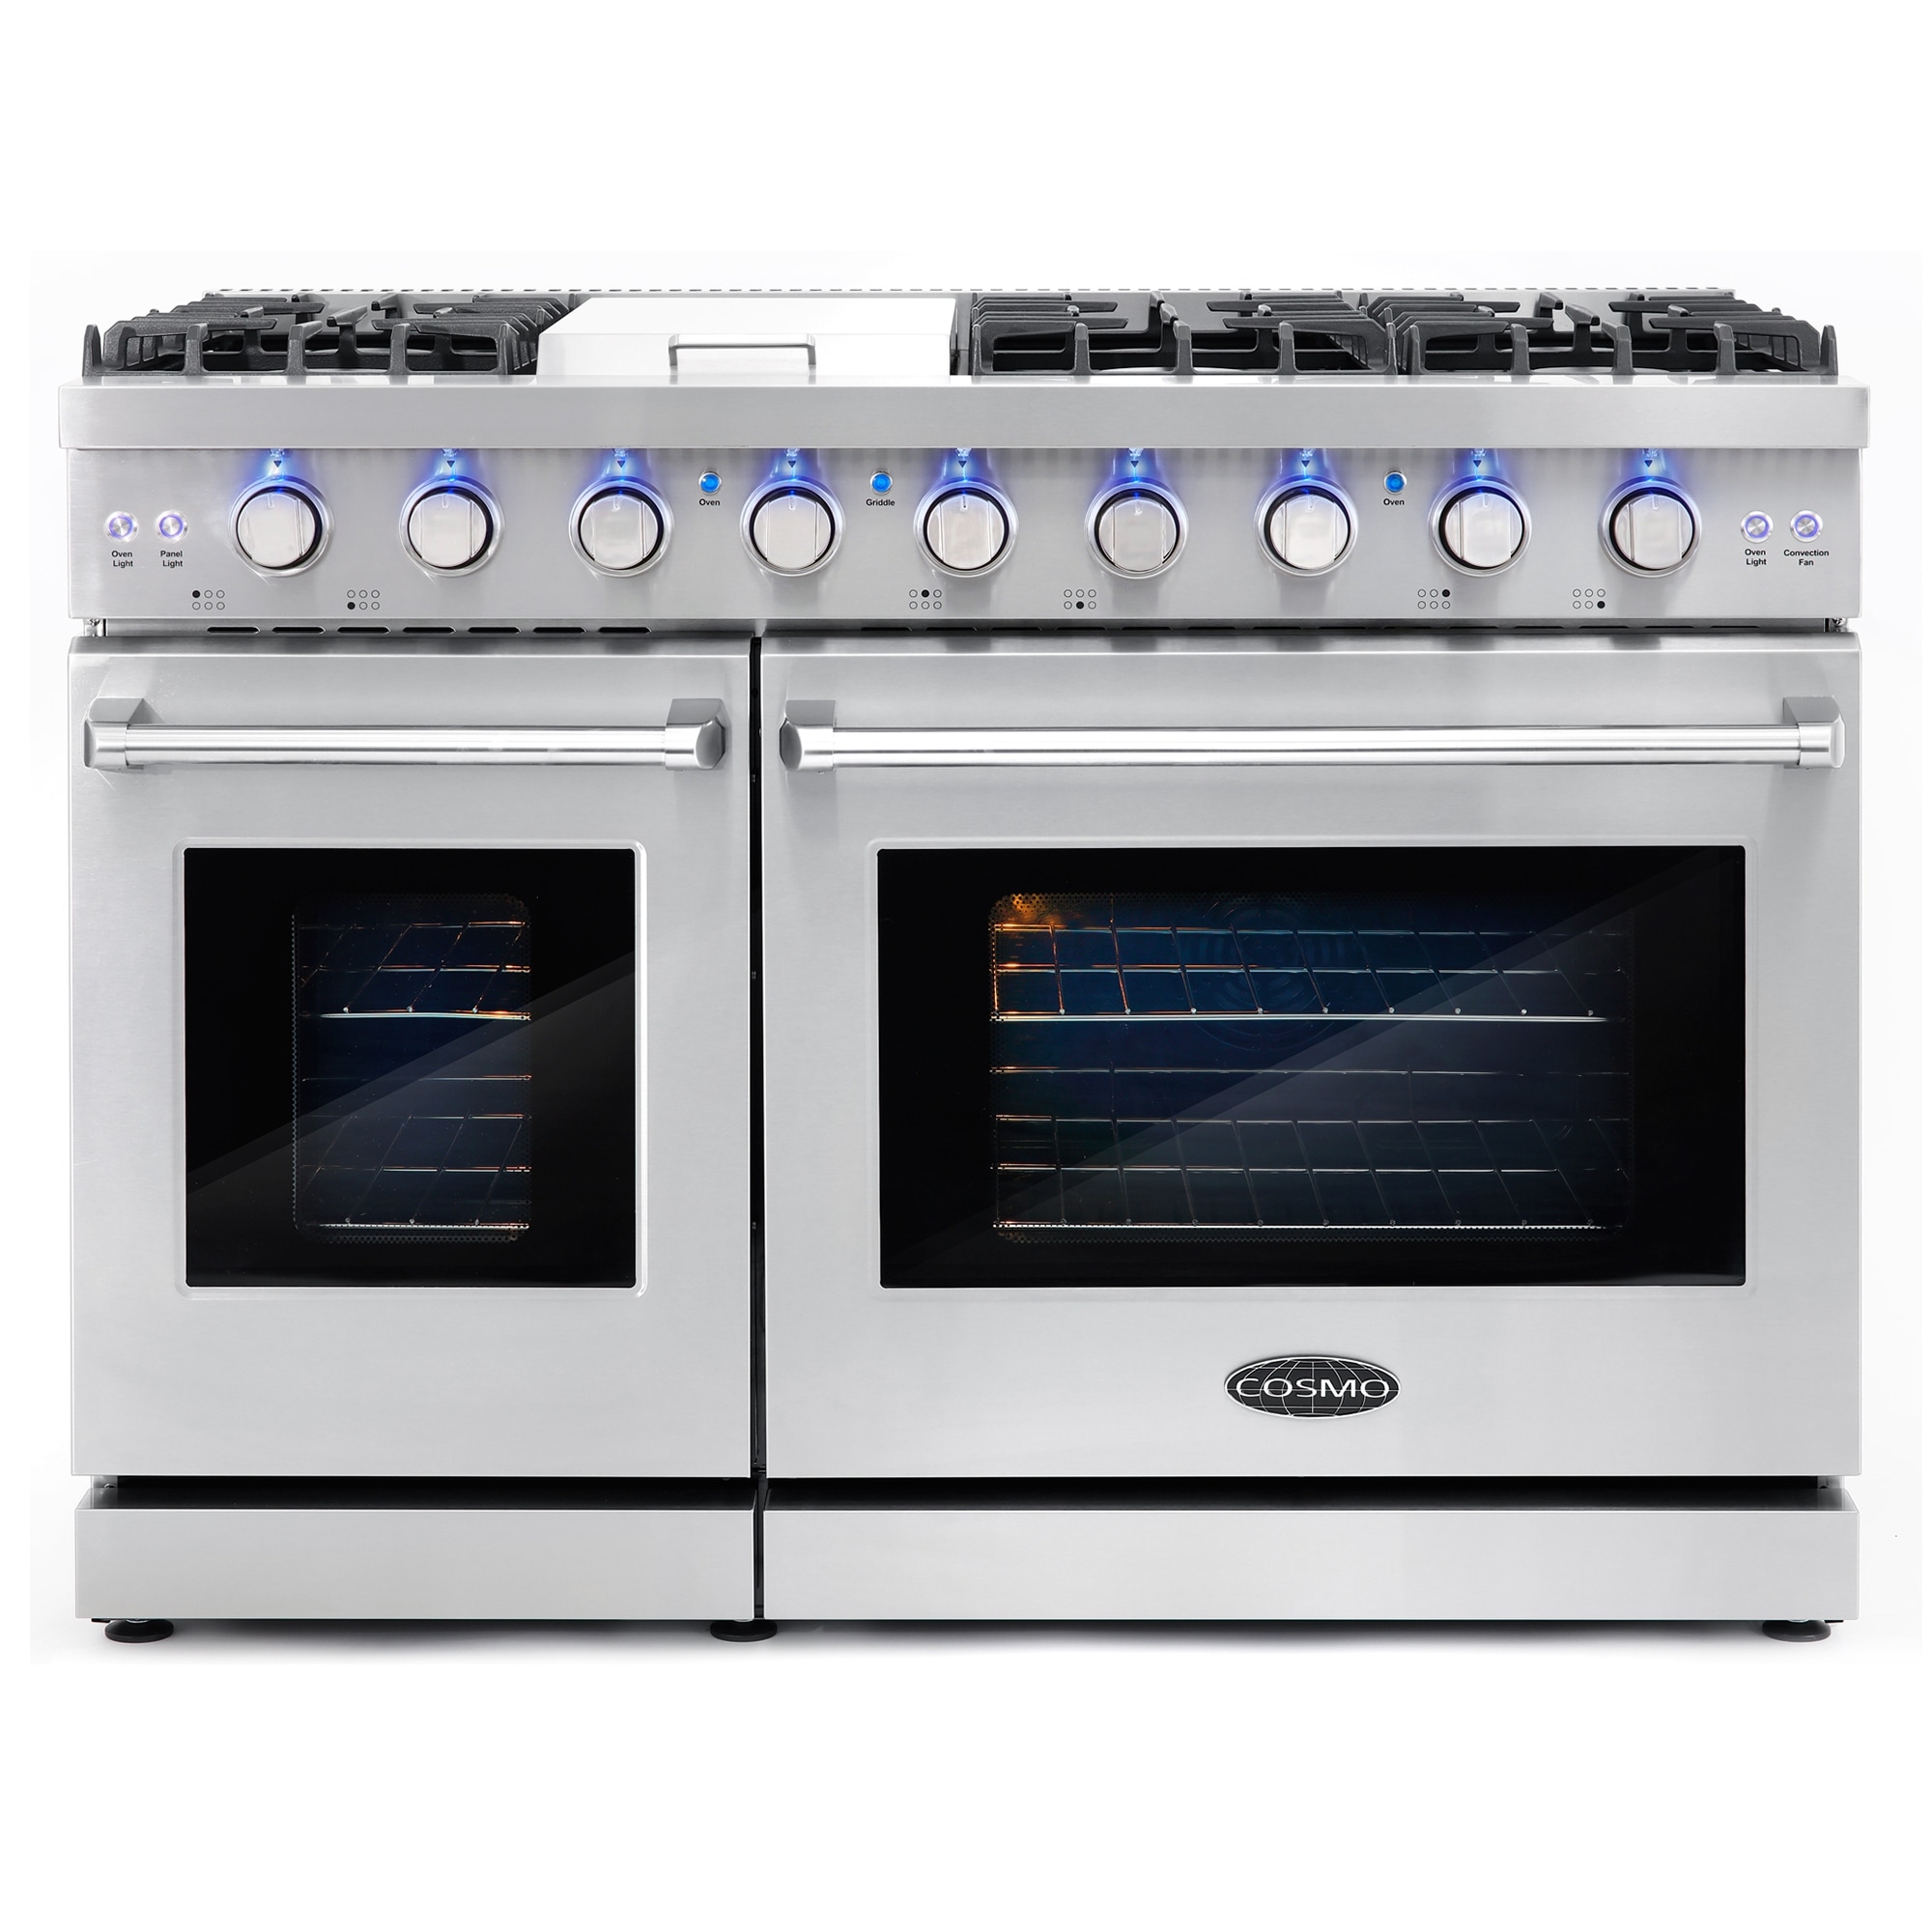 Cosmo 48 in. Double Oven Gas Range with 6 Sealed Burners and 6.8 cu. ft. Capacity Convection Main Oven in Stainless Steel